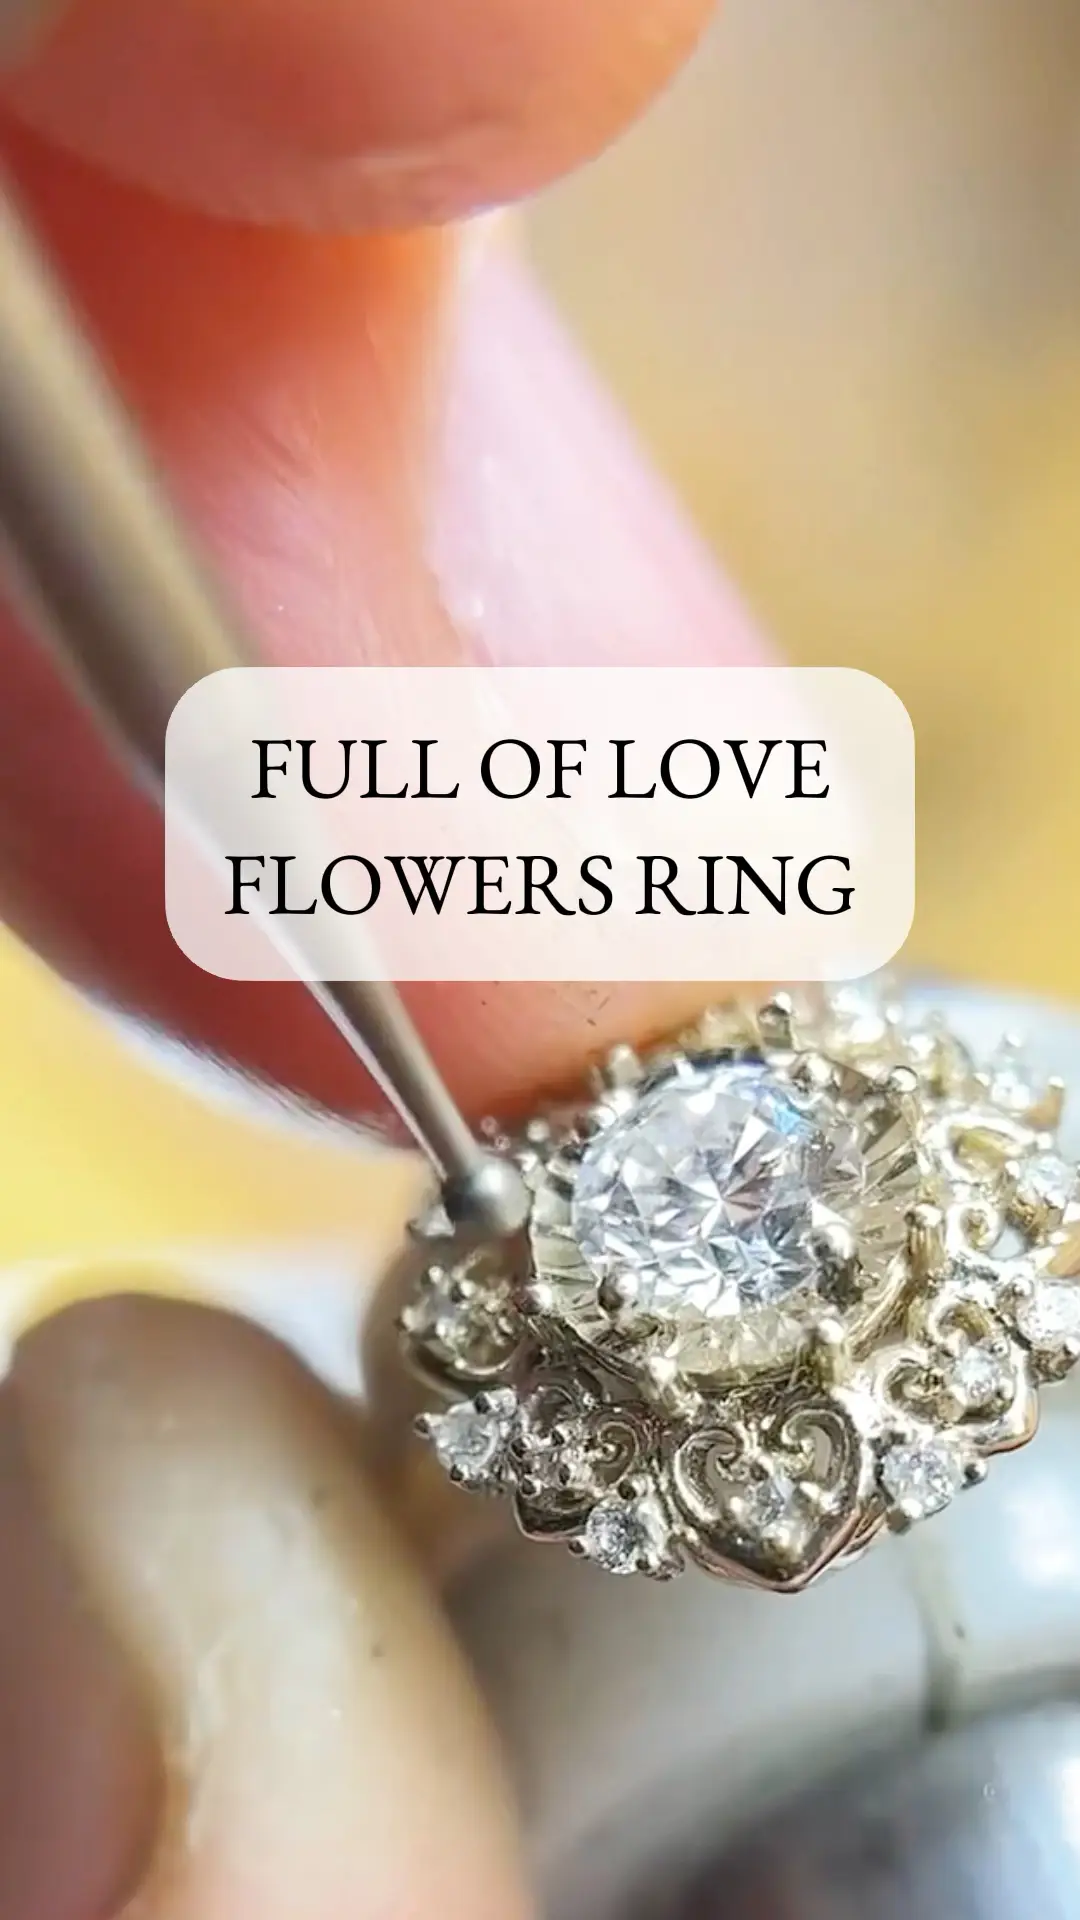 Full of love flowers ring, Video published by MLJ